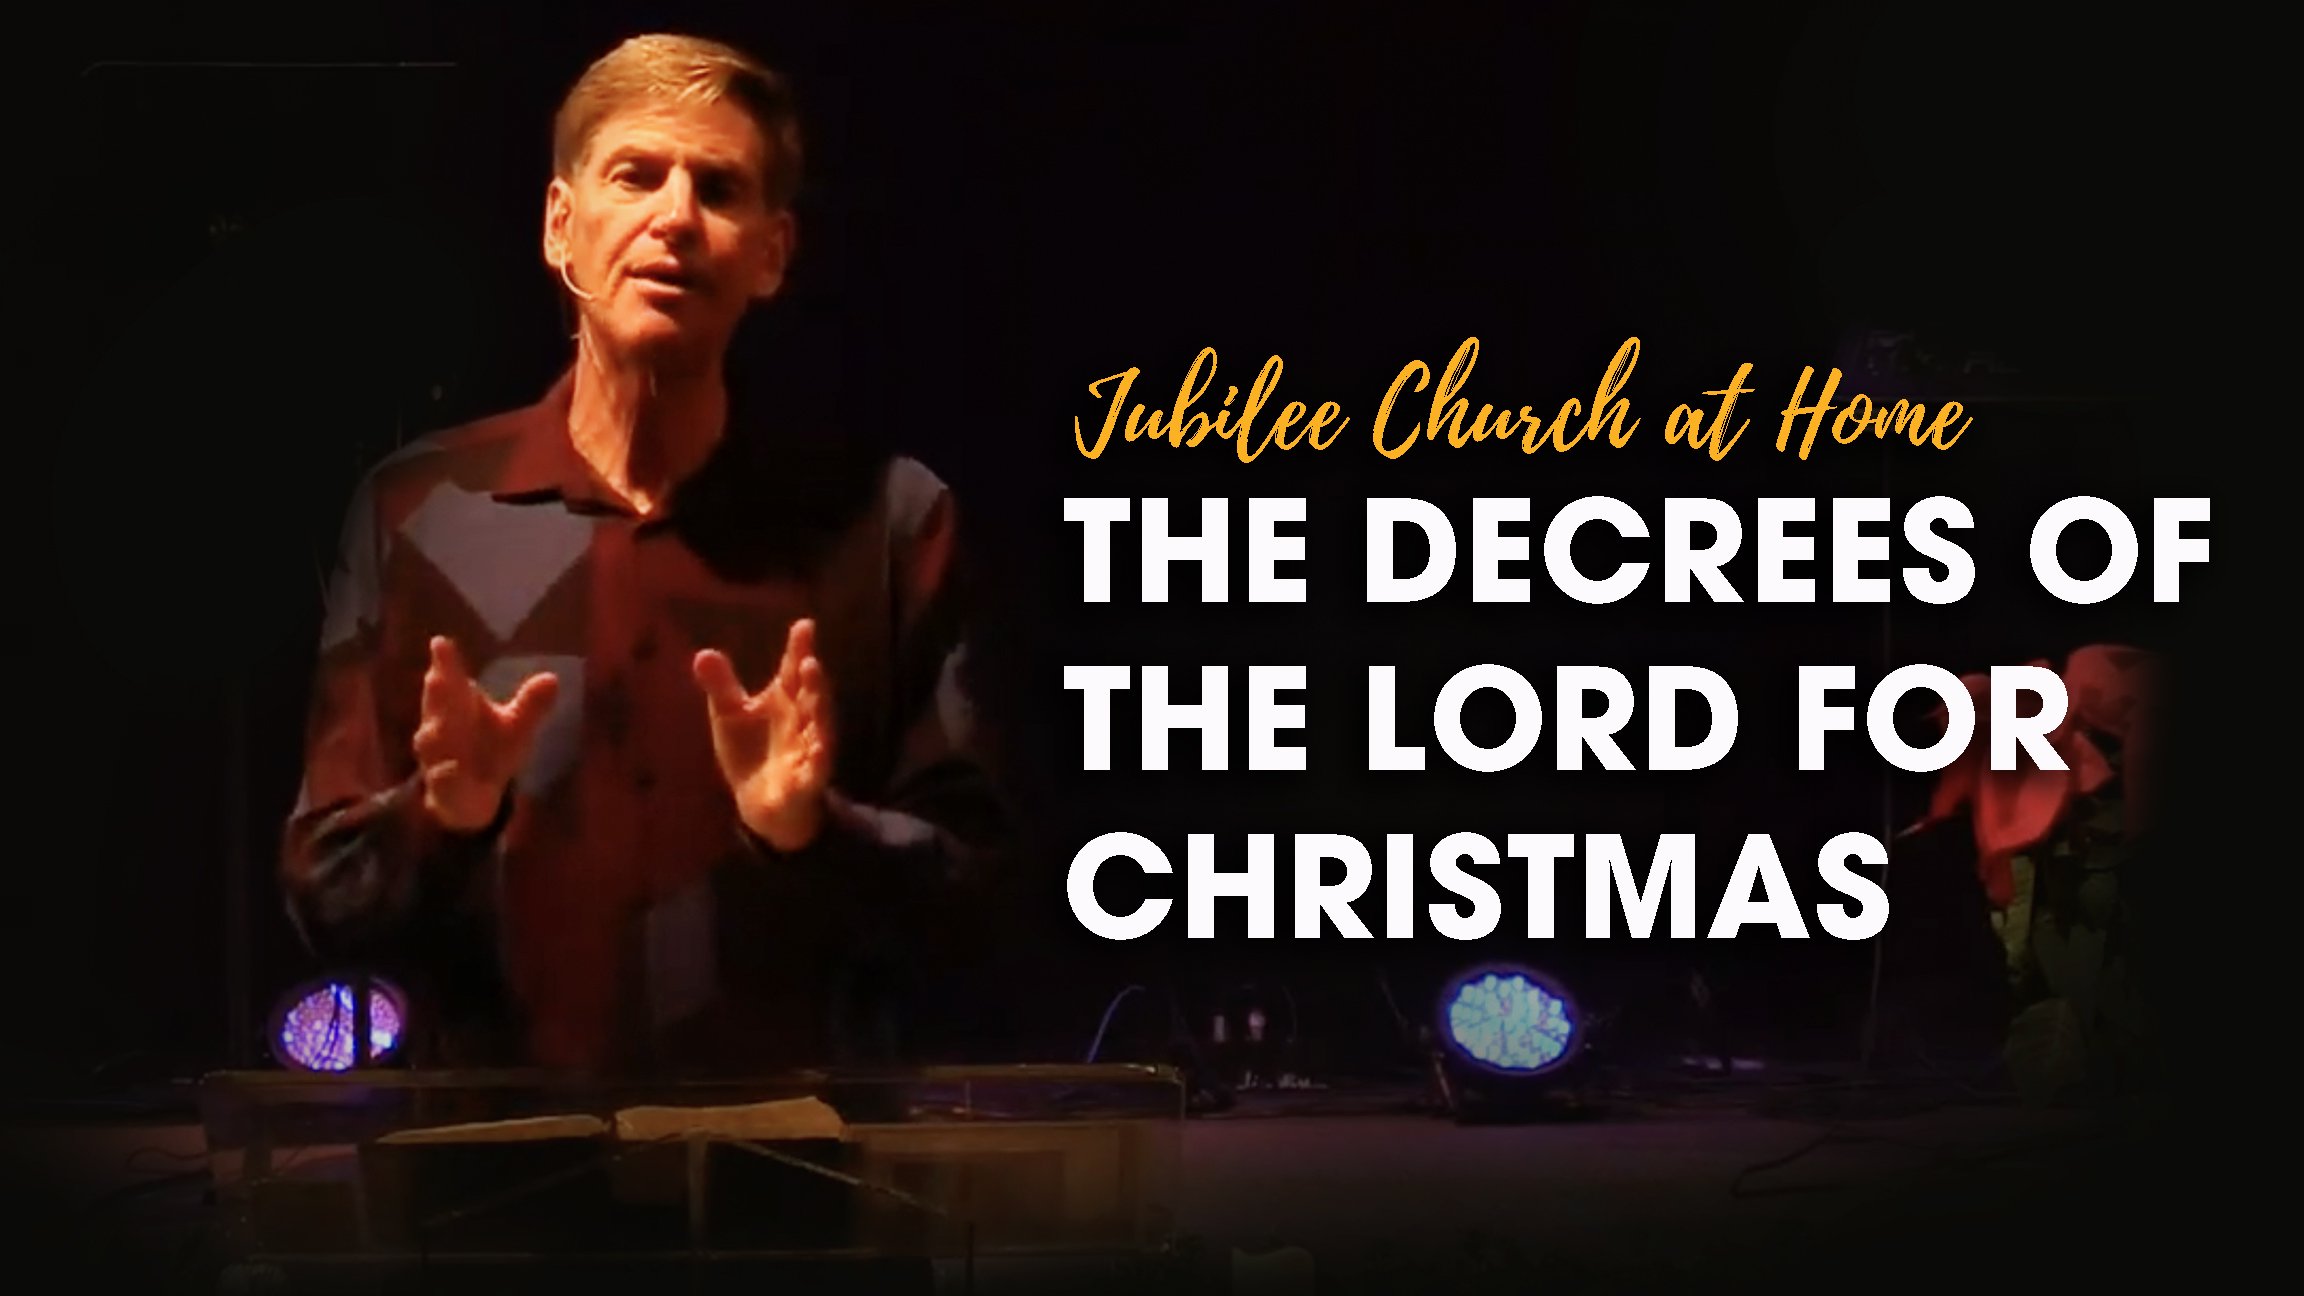 The Decrees of the Lord for Christmas